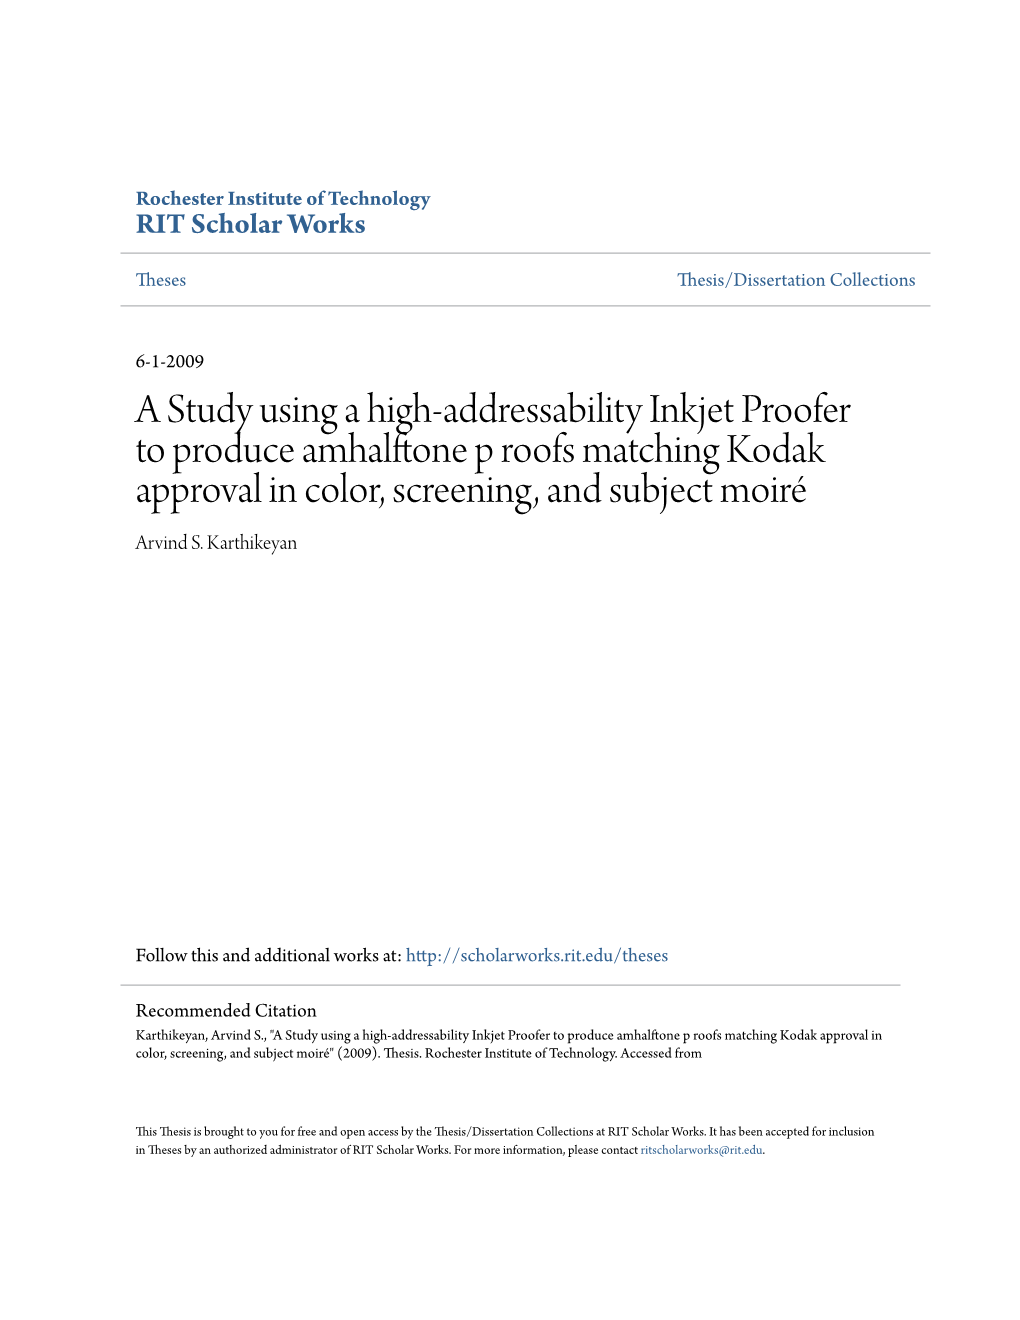 A Study Using a High-Addressability Inkjet Proofer to Produce Amhalftone P Roofs Matching Kodak Approval in Color, Screening, and Subject Moiré Arvind S